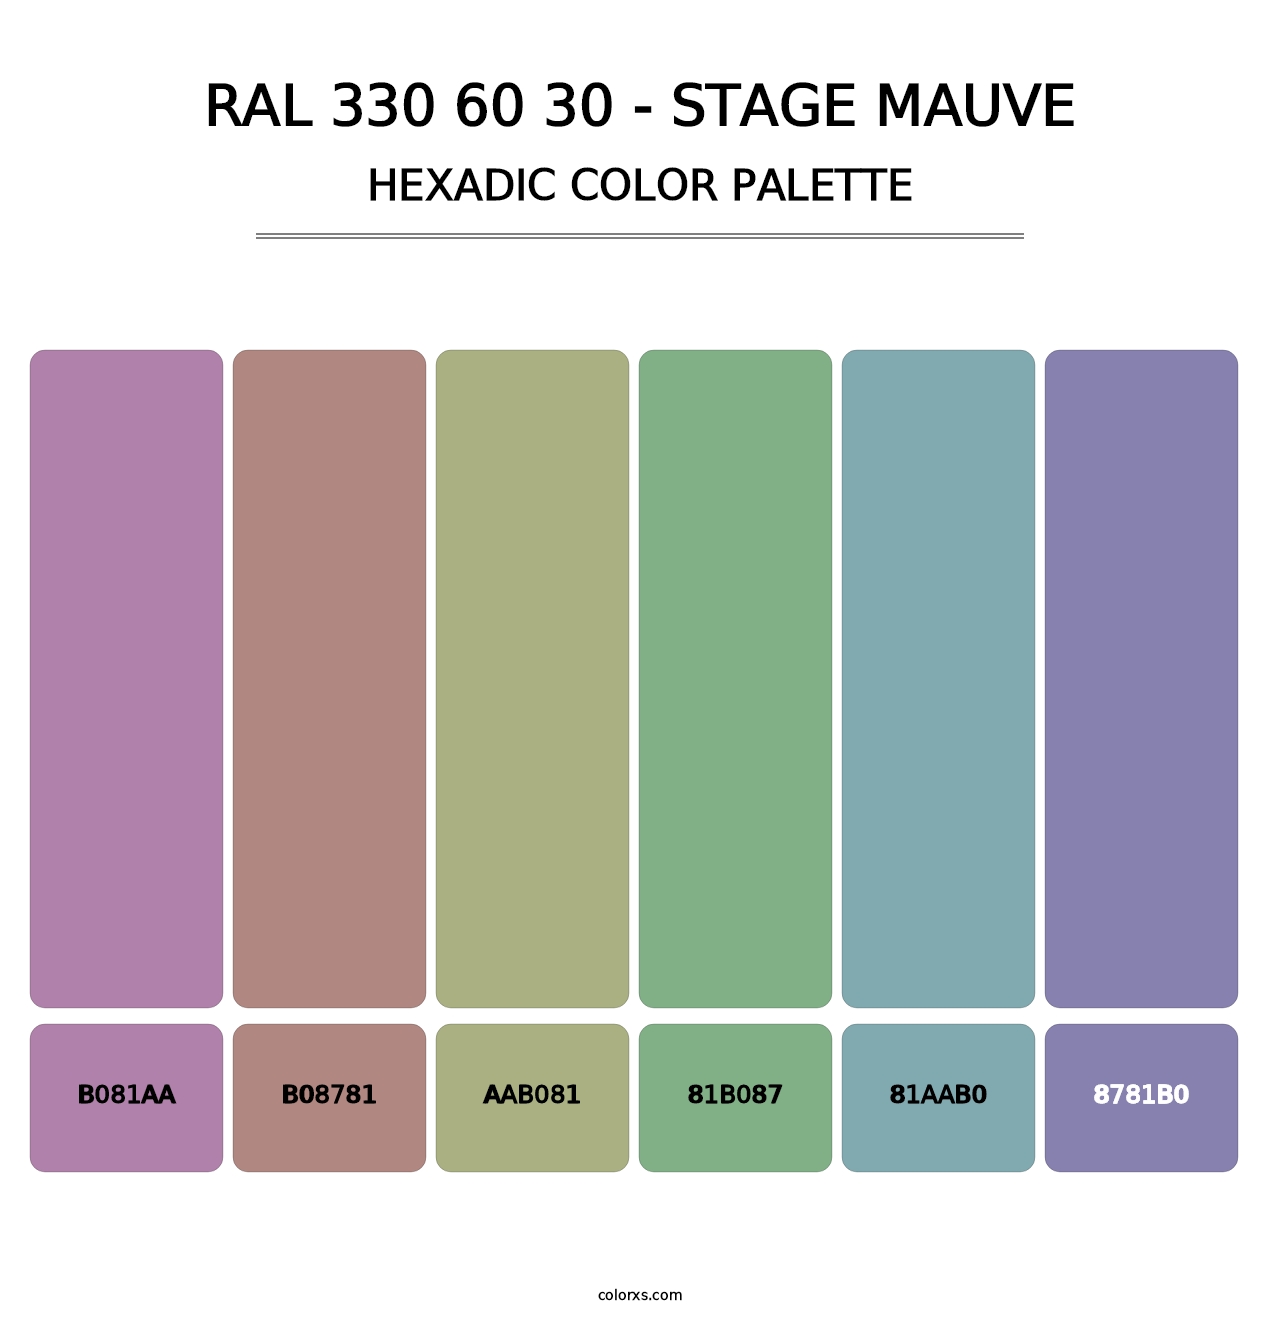 RAL 330 60 30 - Stage Mauve - Hexadic Color Palette